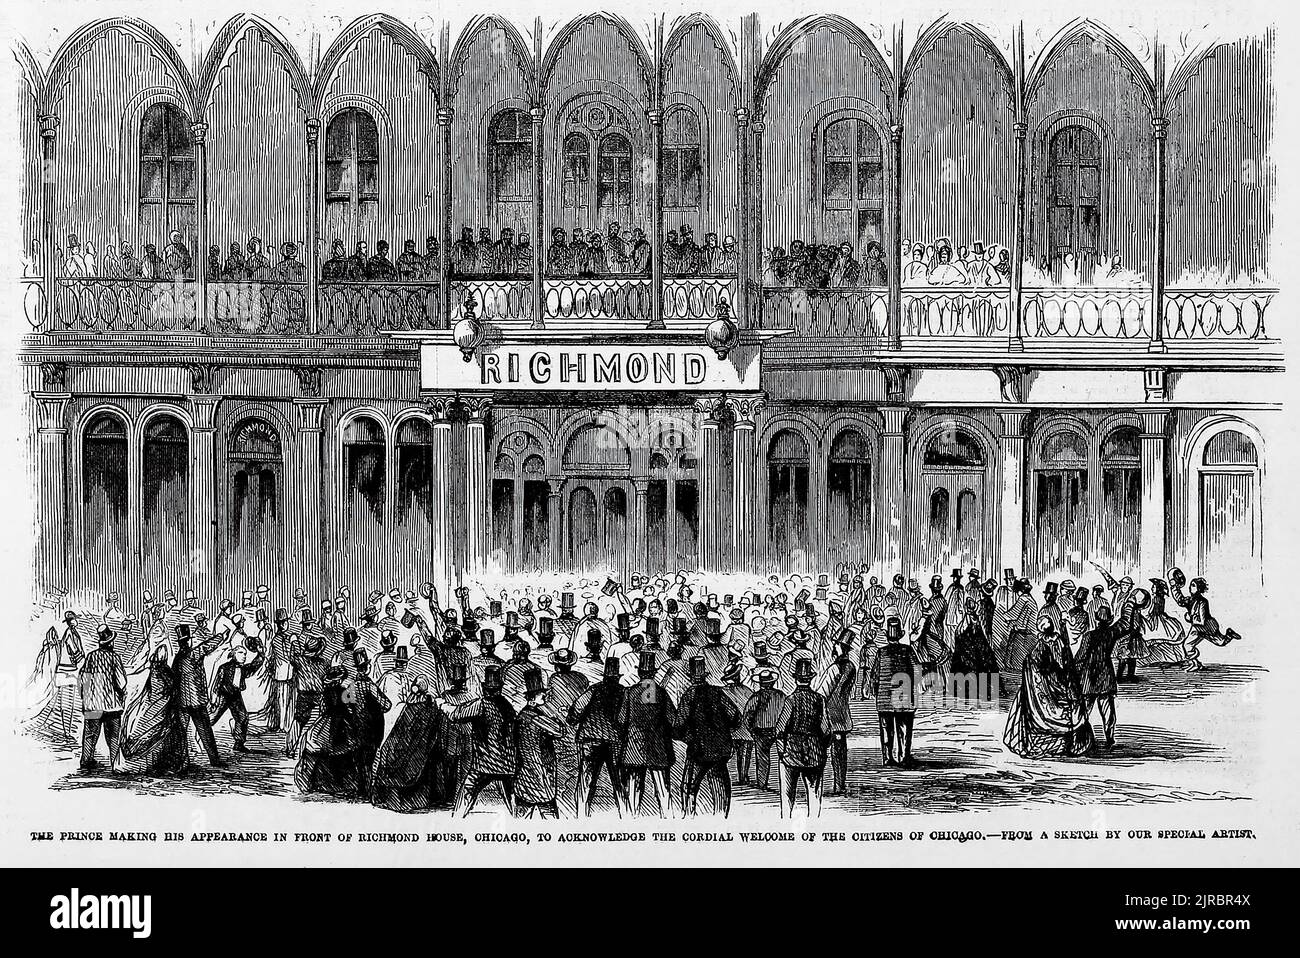 The Prince making his appearance in front of Richmond House, Chicago, Illinois, to acknowledge the cordial welcome of the citizens of Chicago. 1860 visit of the Prince of Wales, Edward Albert, to America. 19th century illustration from Frank Leslie's Illustrated Newspaper Stock Photo